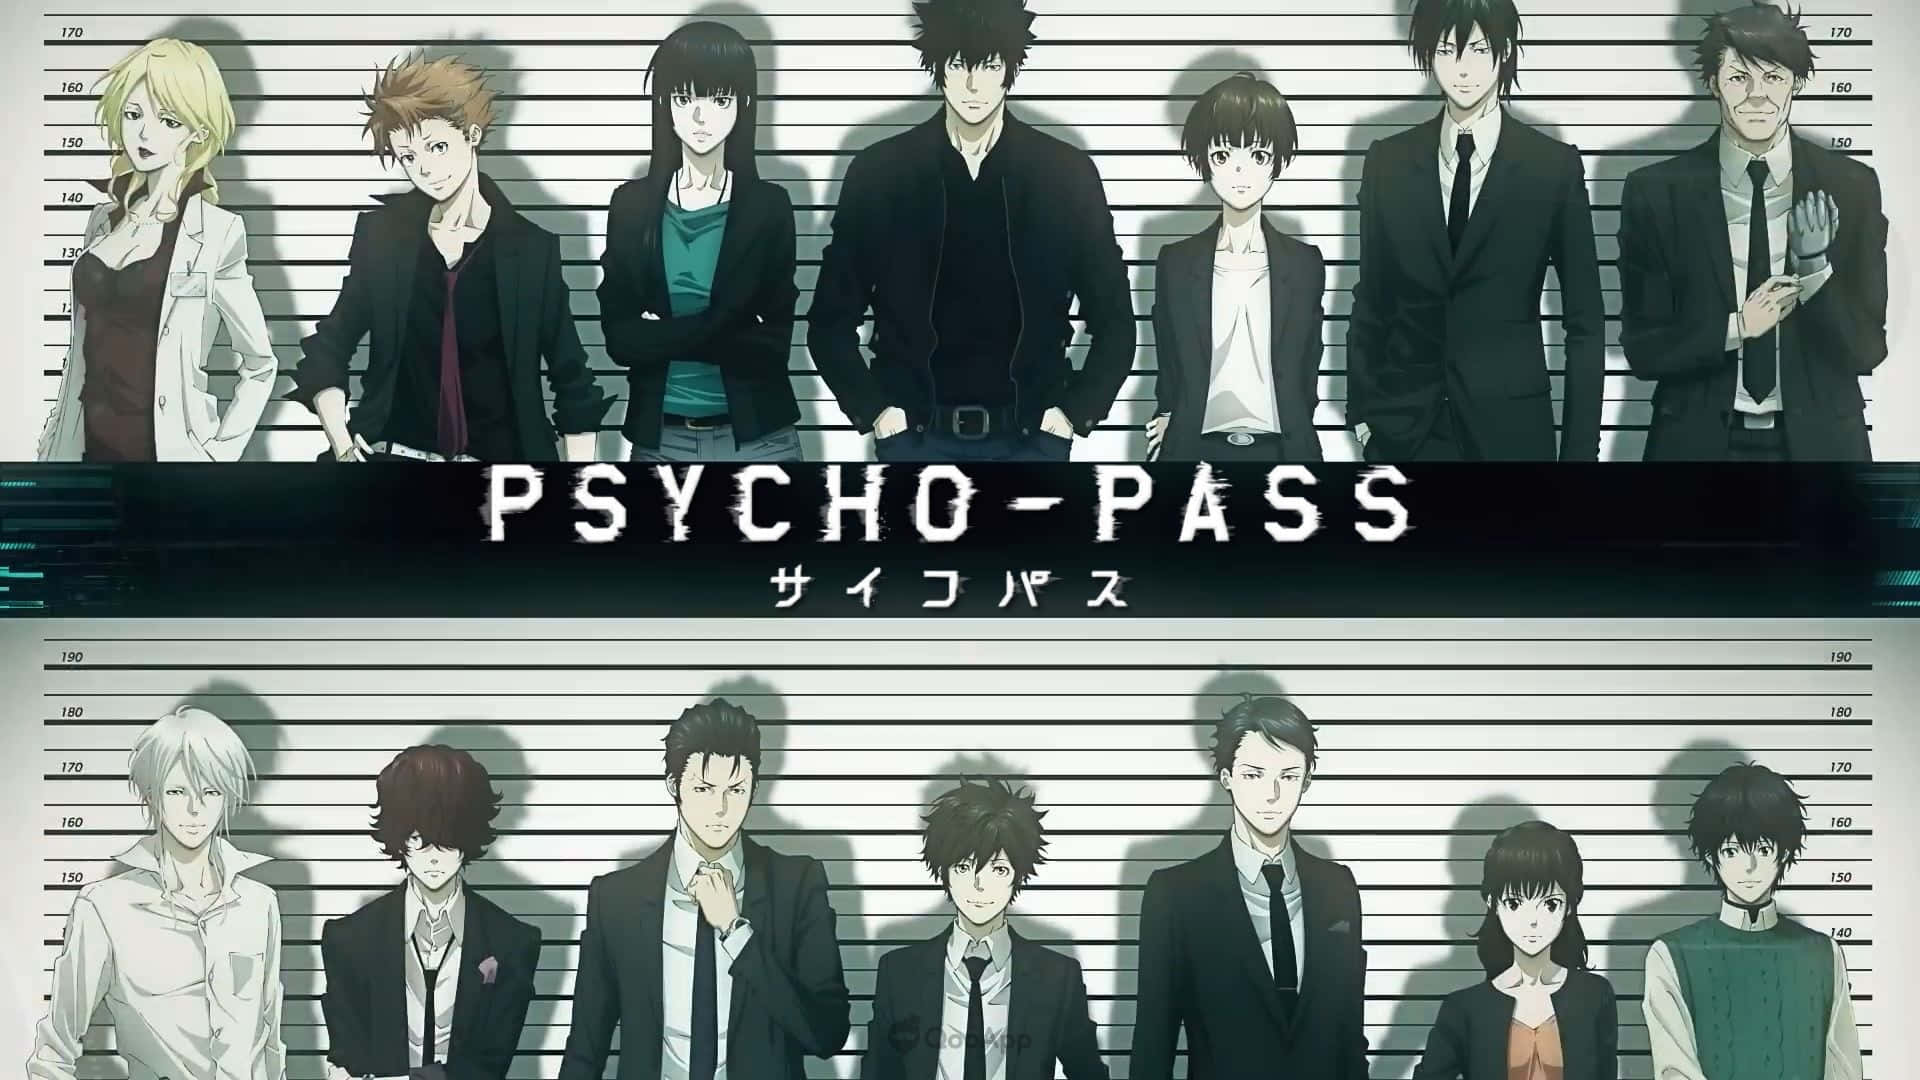 Psycho Pass Wallpapers - Top 25 Psycho Pass Anime Backgrounds